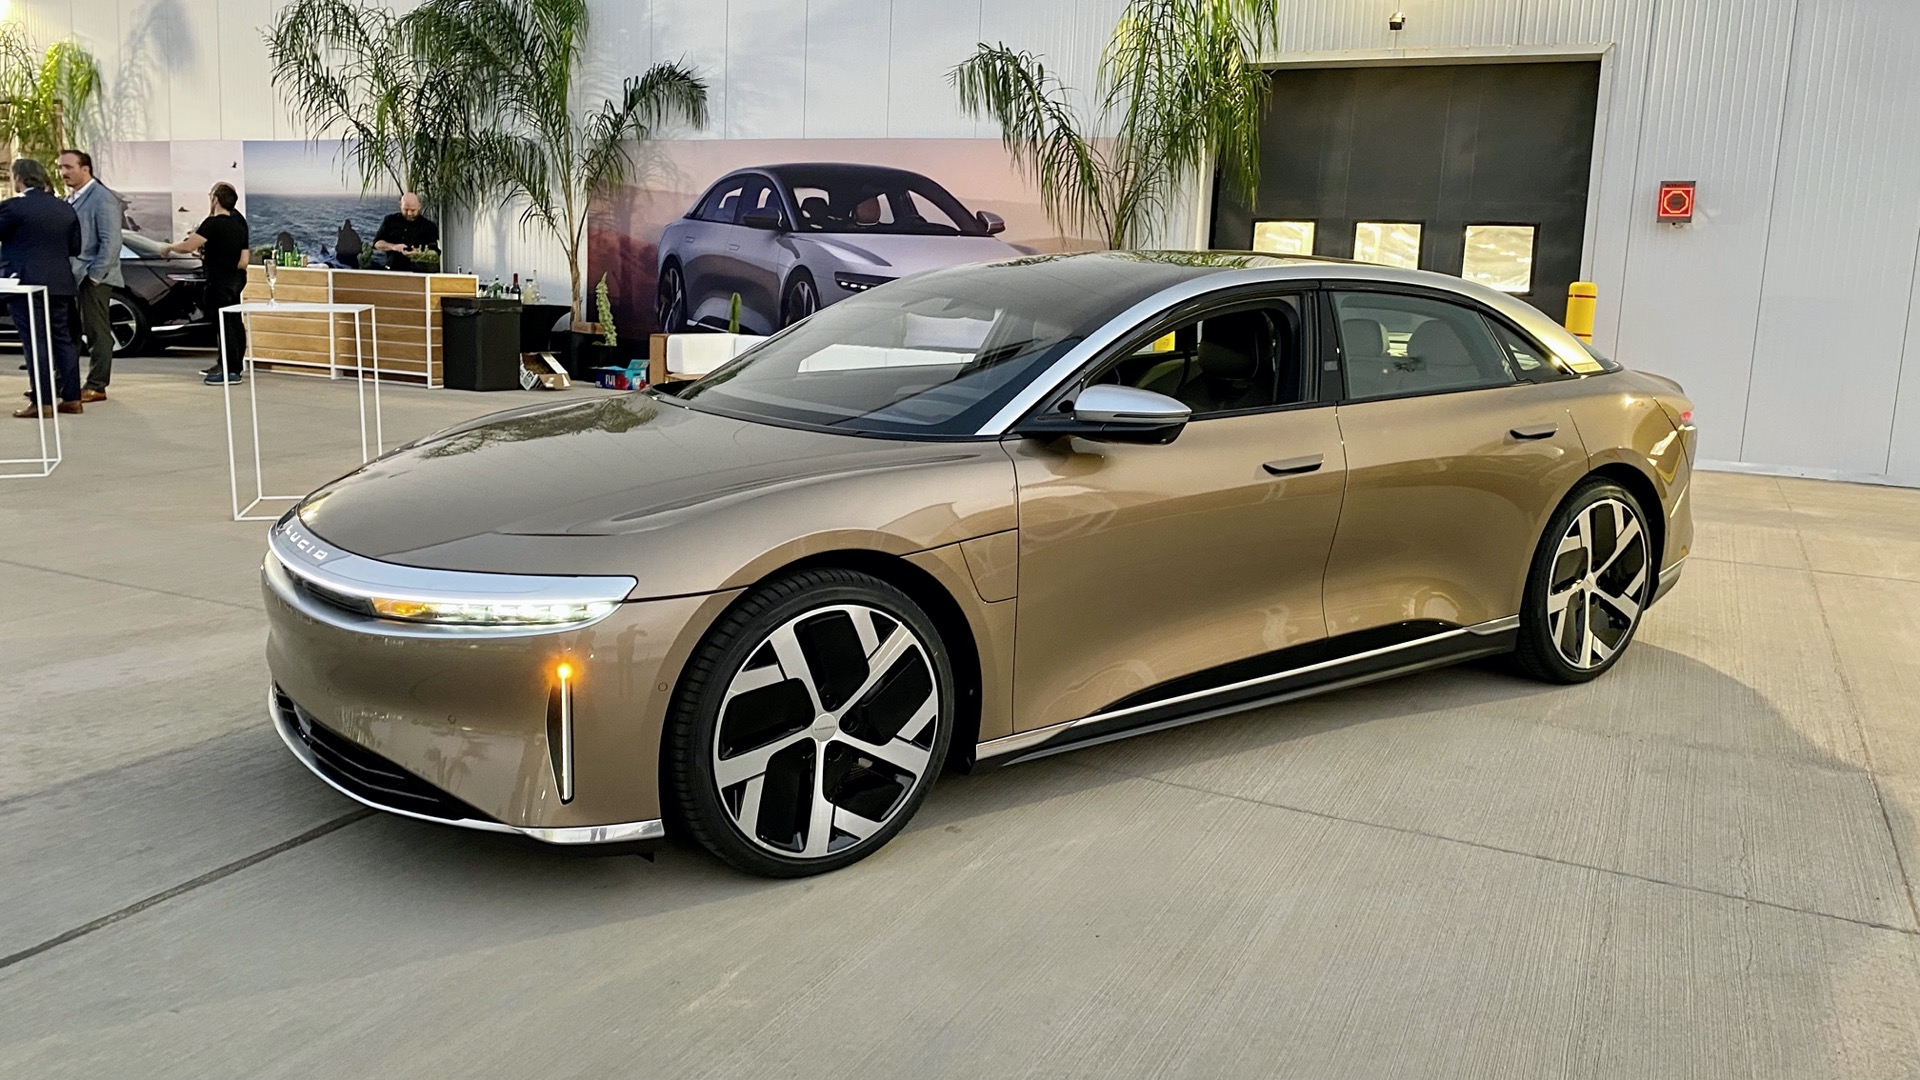 First drive review: 2022 Lucid Air delivers a new leading edge for EVsFirst drive review: 2022 Lucid Air delivers a new leading edge for EVs